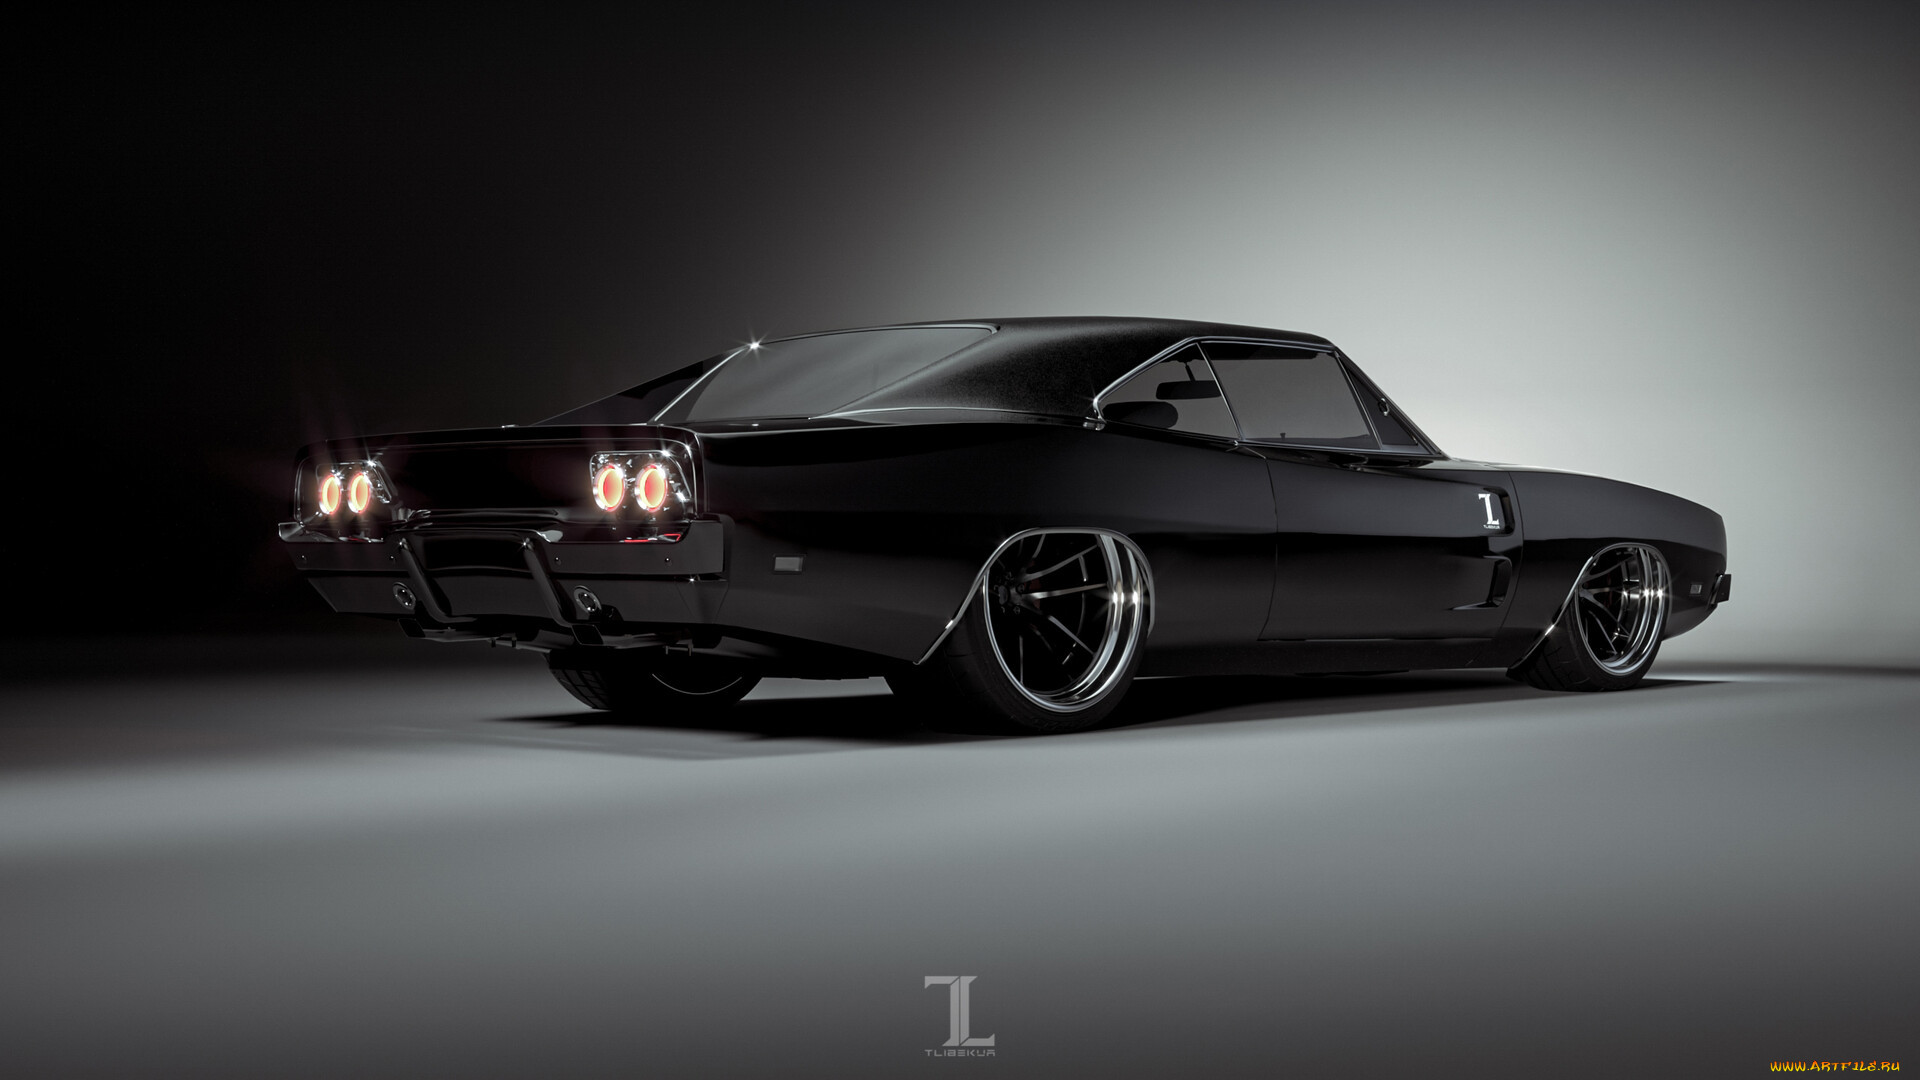 , 3, dodge, charger, muscle, car, stance, mopar, american, classic